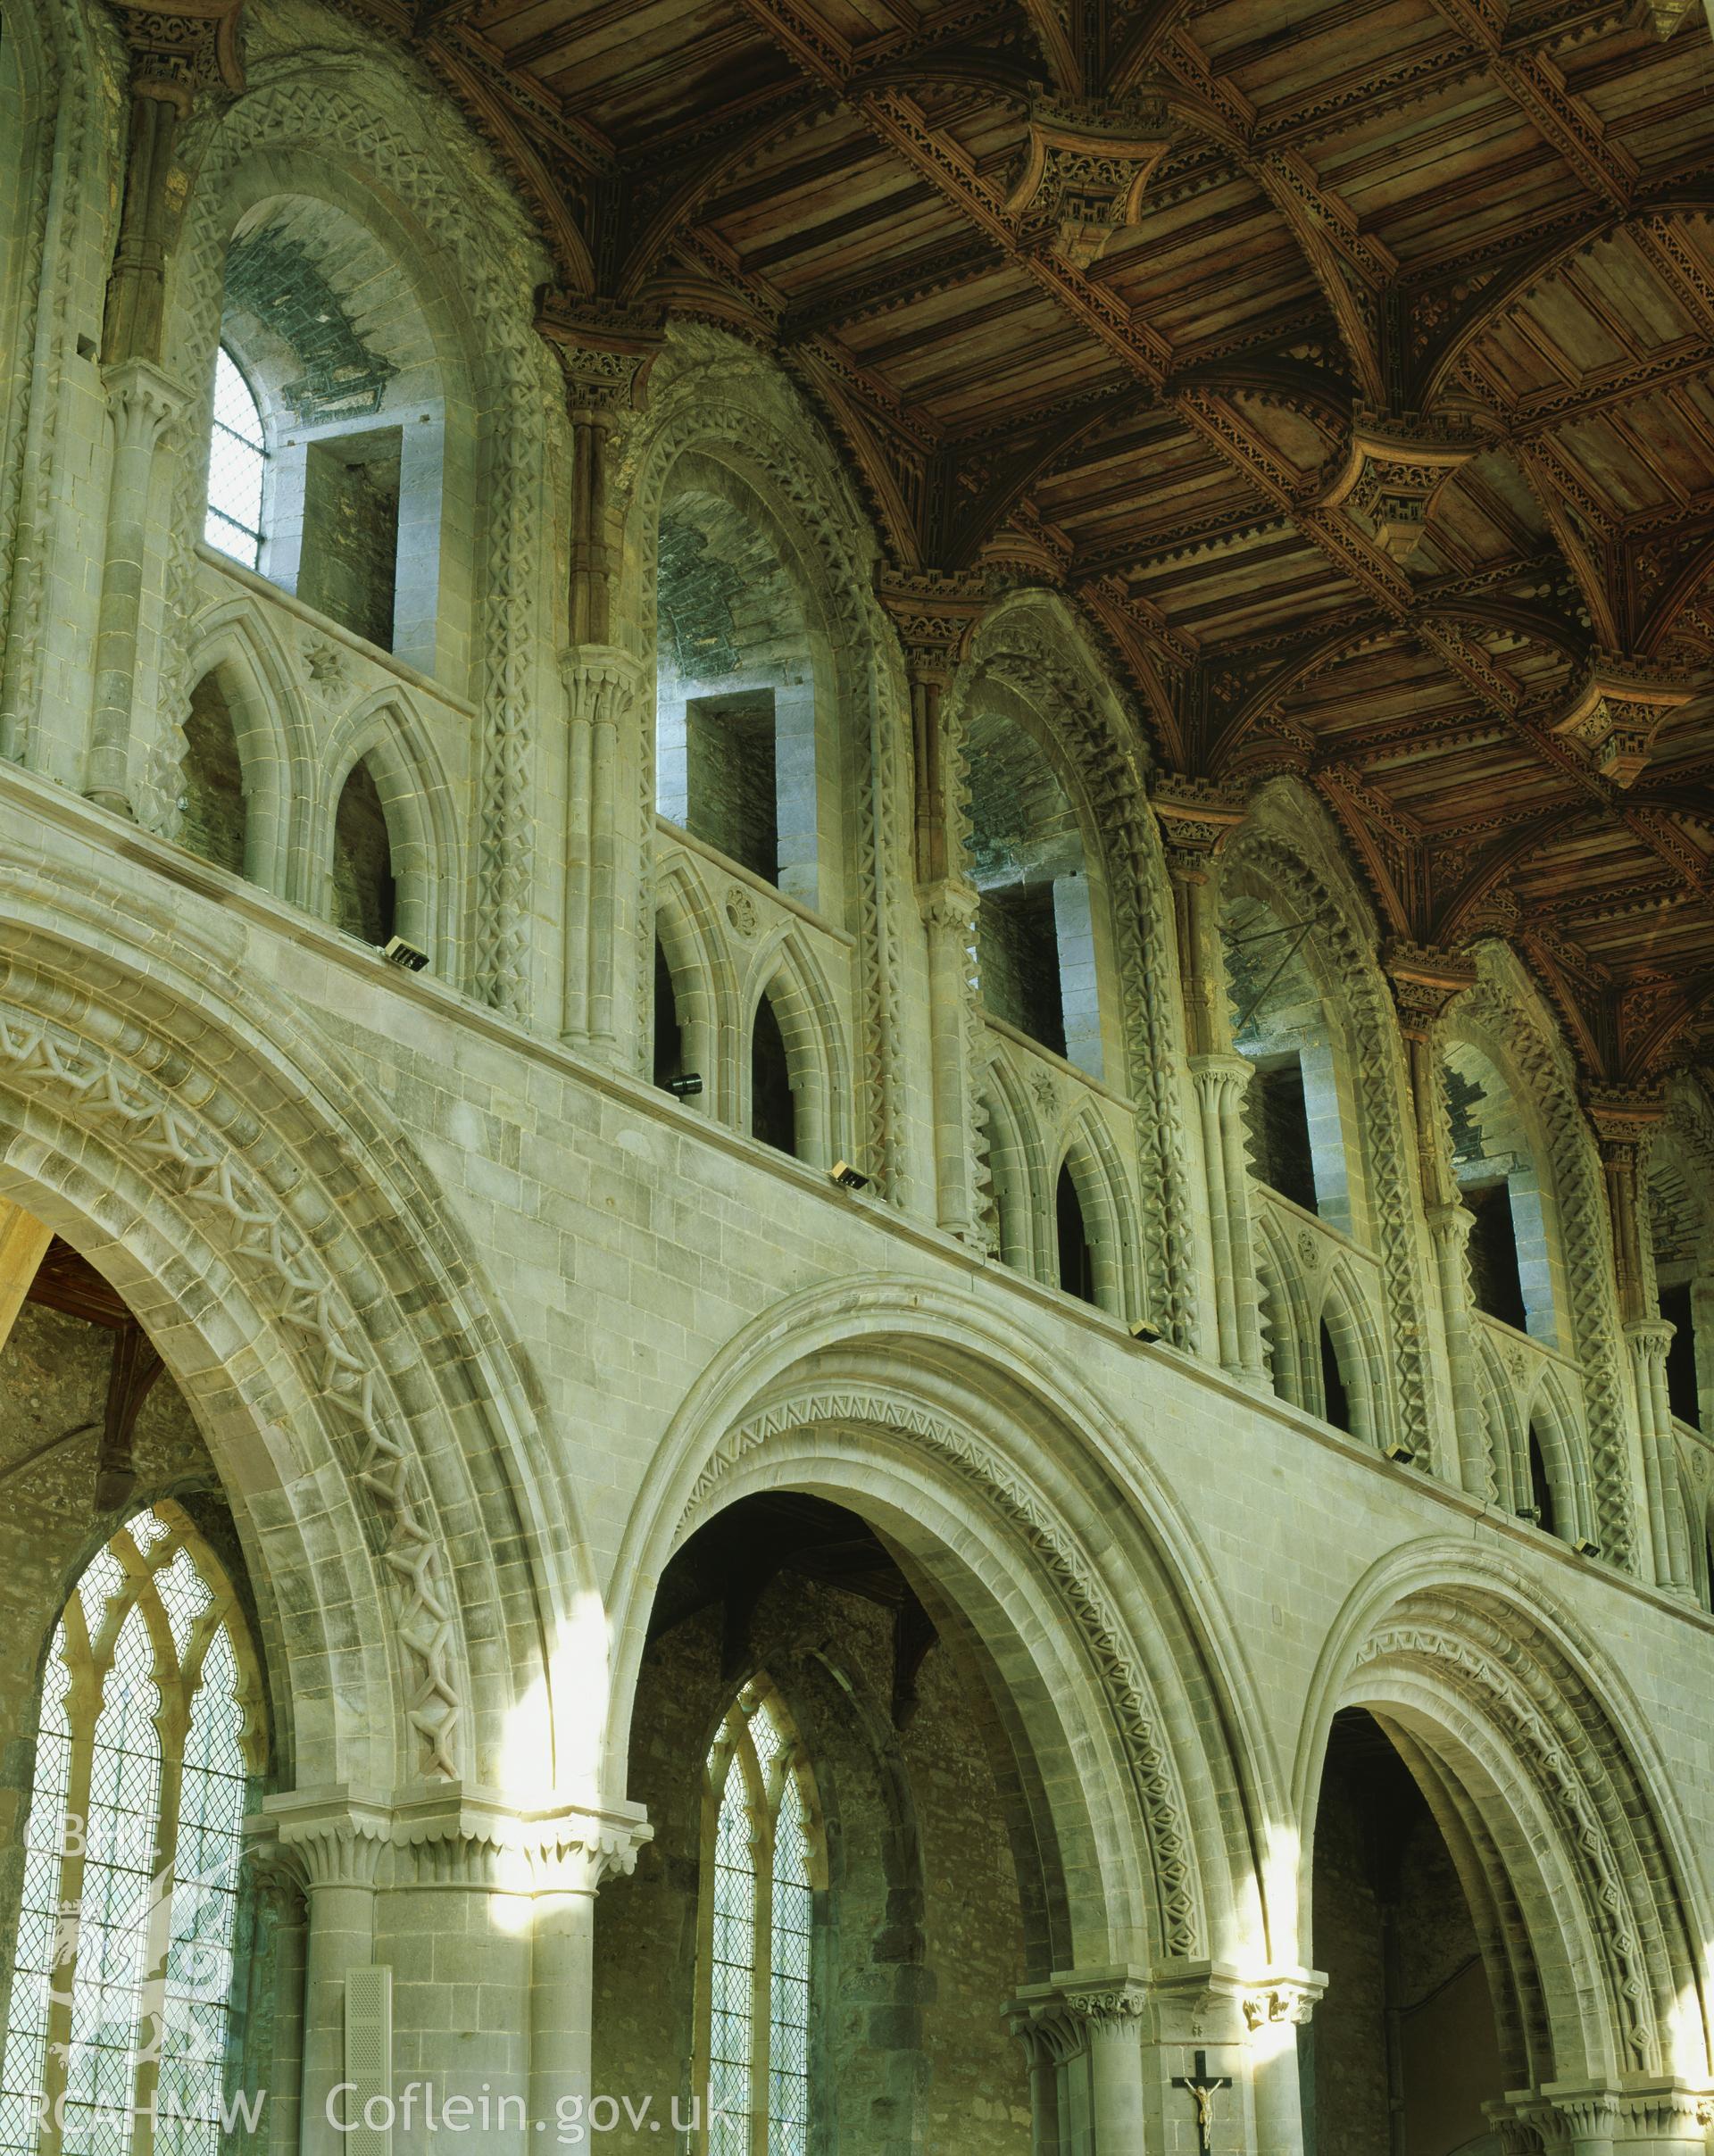 RCAHMW colour transparency showing the windows anad ceiling in the clerestory, St Davids Cathedral, taken by Iain Wright, 2003.